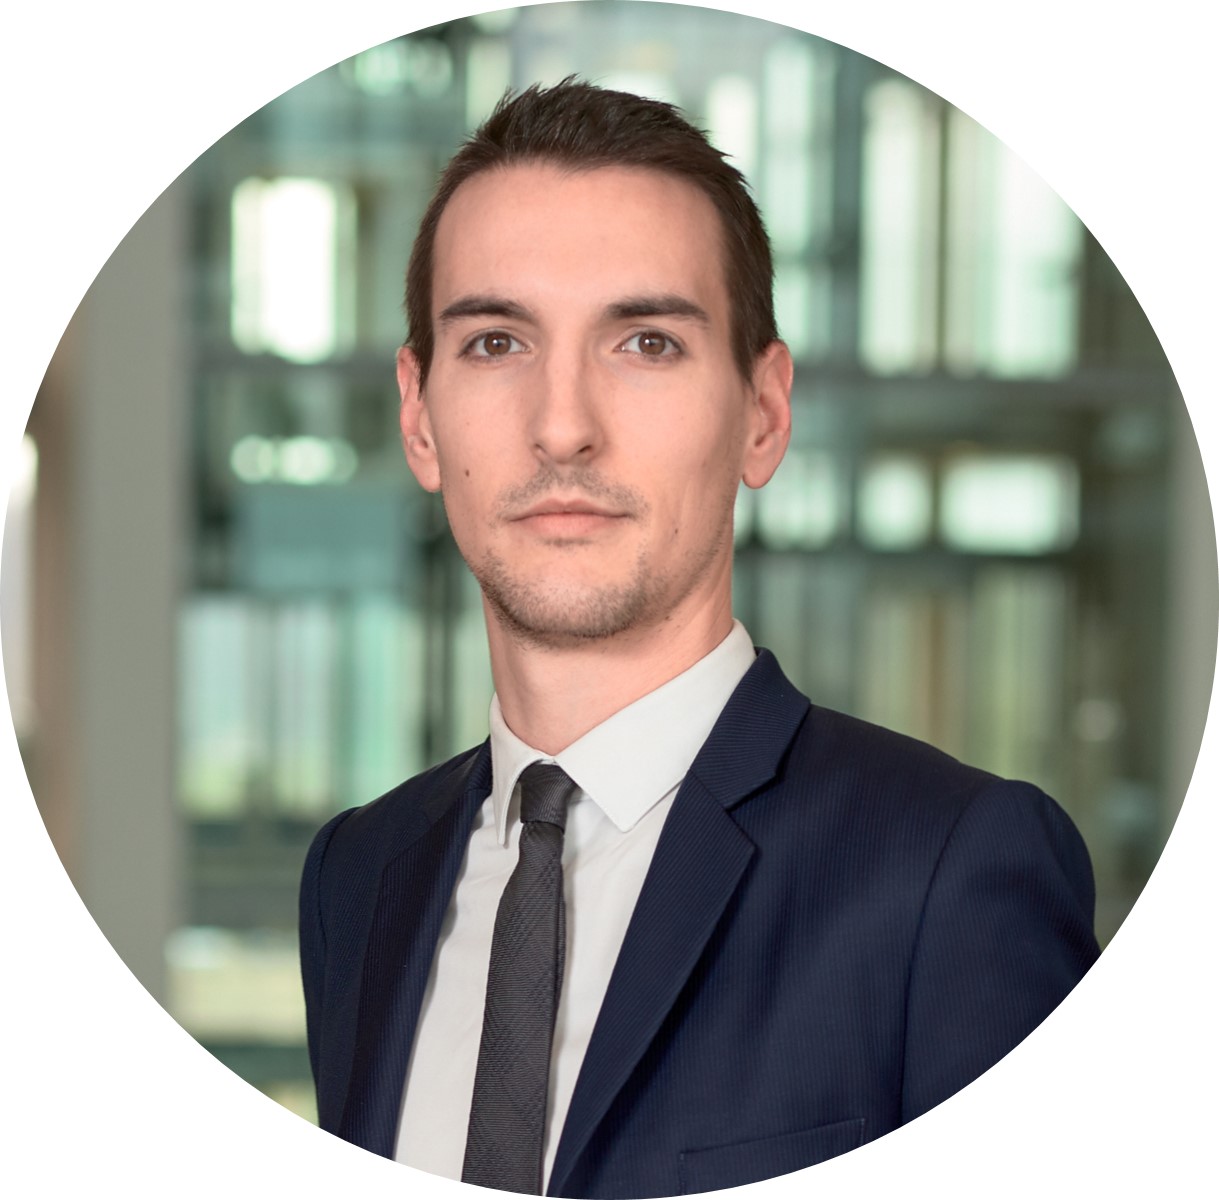 Florent Delory, Director, Asset Management, at PwC Luxembourg